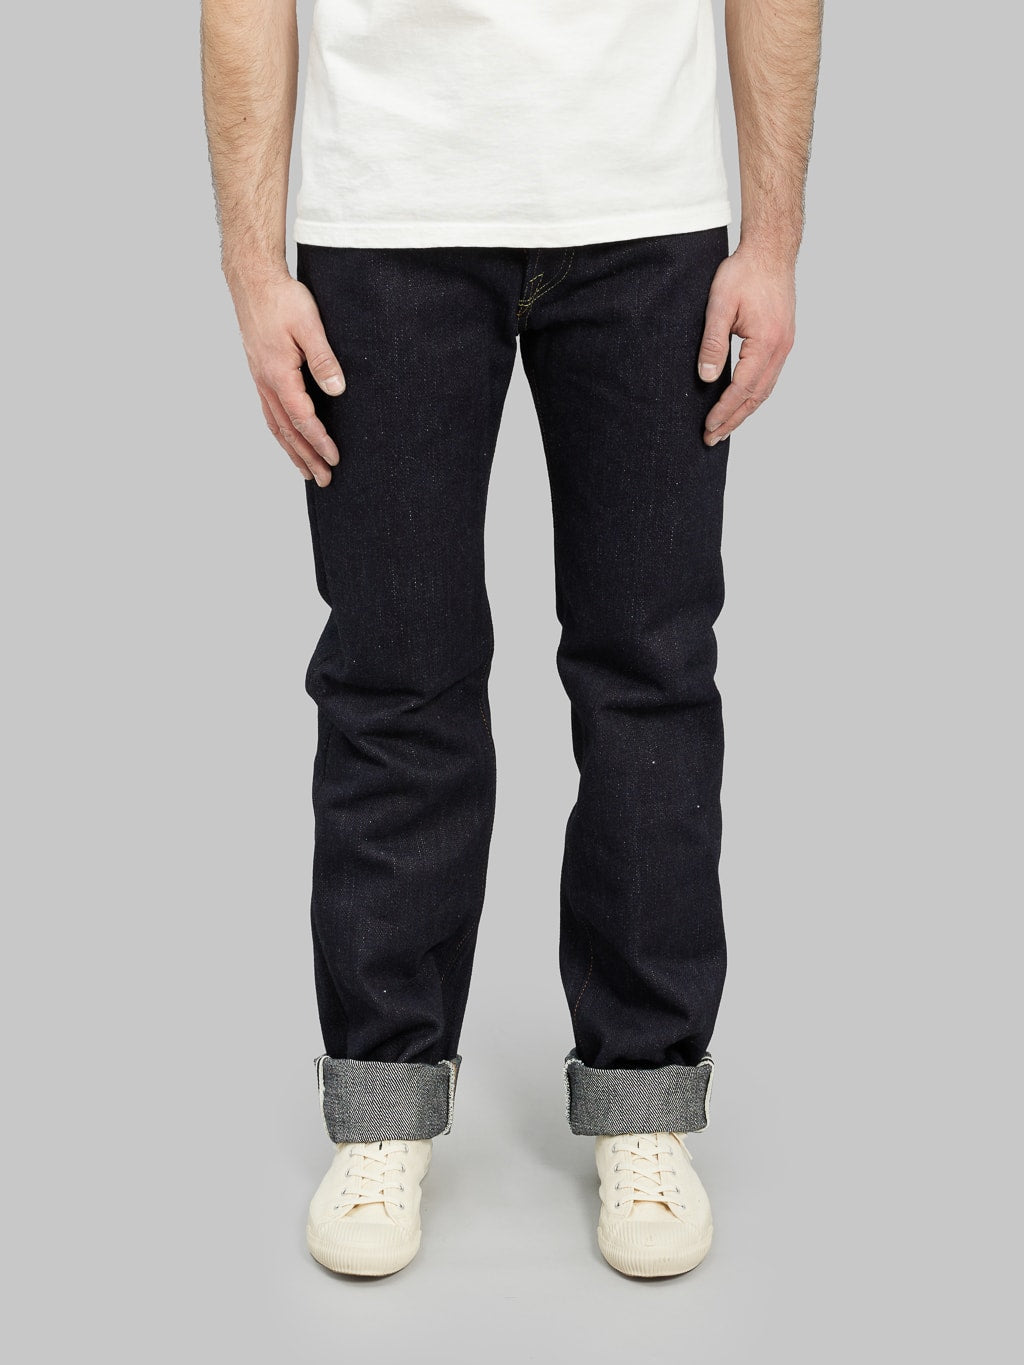 The Strike Gold Extra Heavyweight regular straight jeans front view